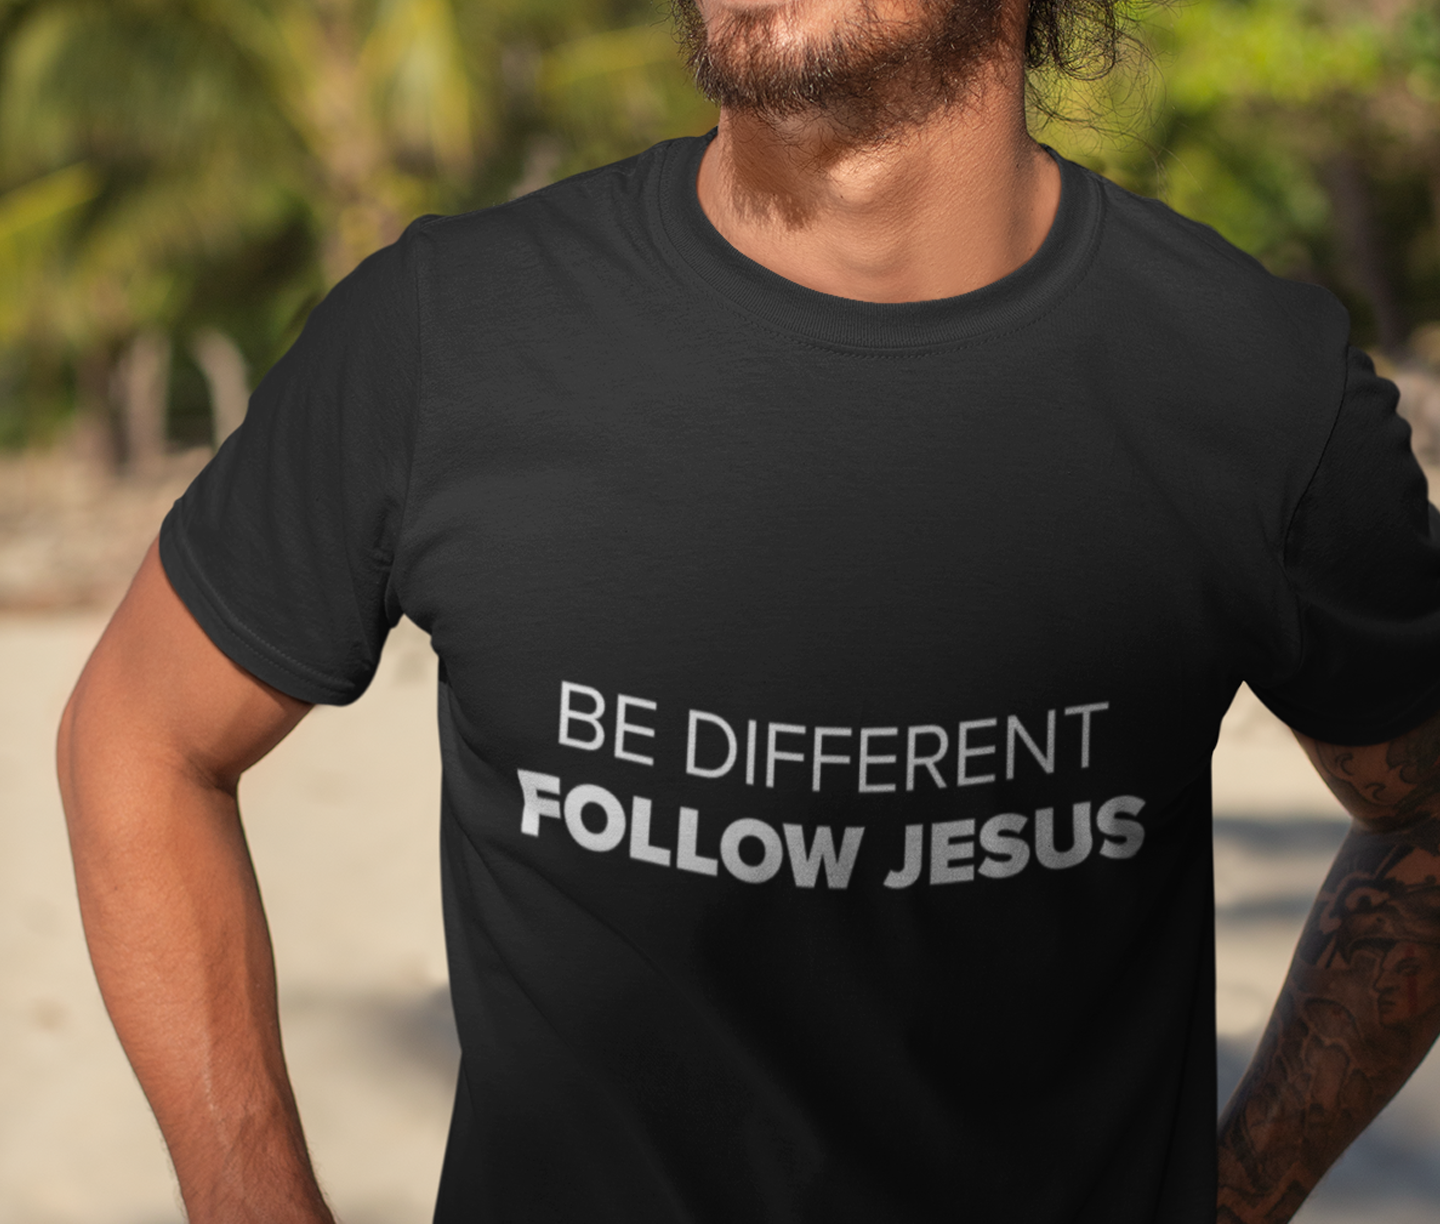 BE DIFFERENT FOLLOW JESUS FRONT - CHRISTIAN CLOTHING